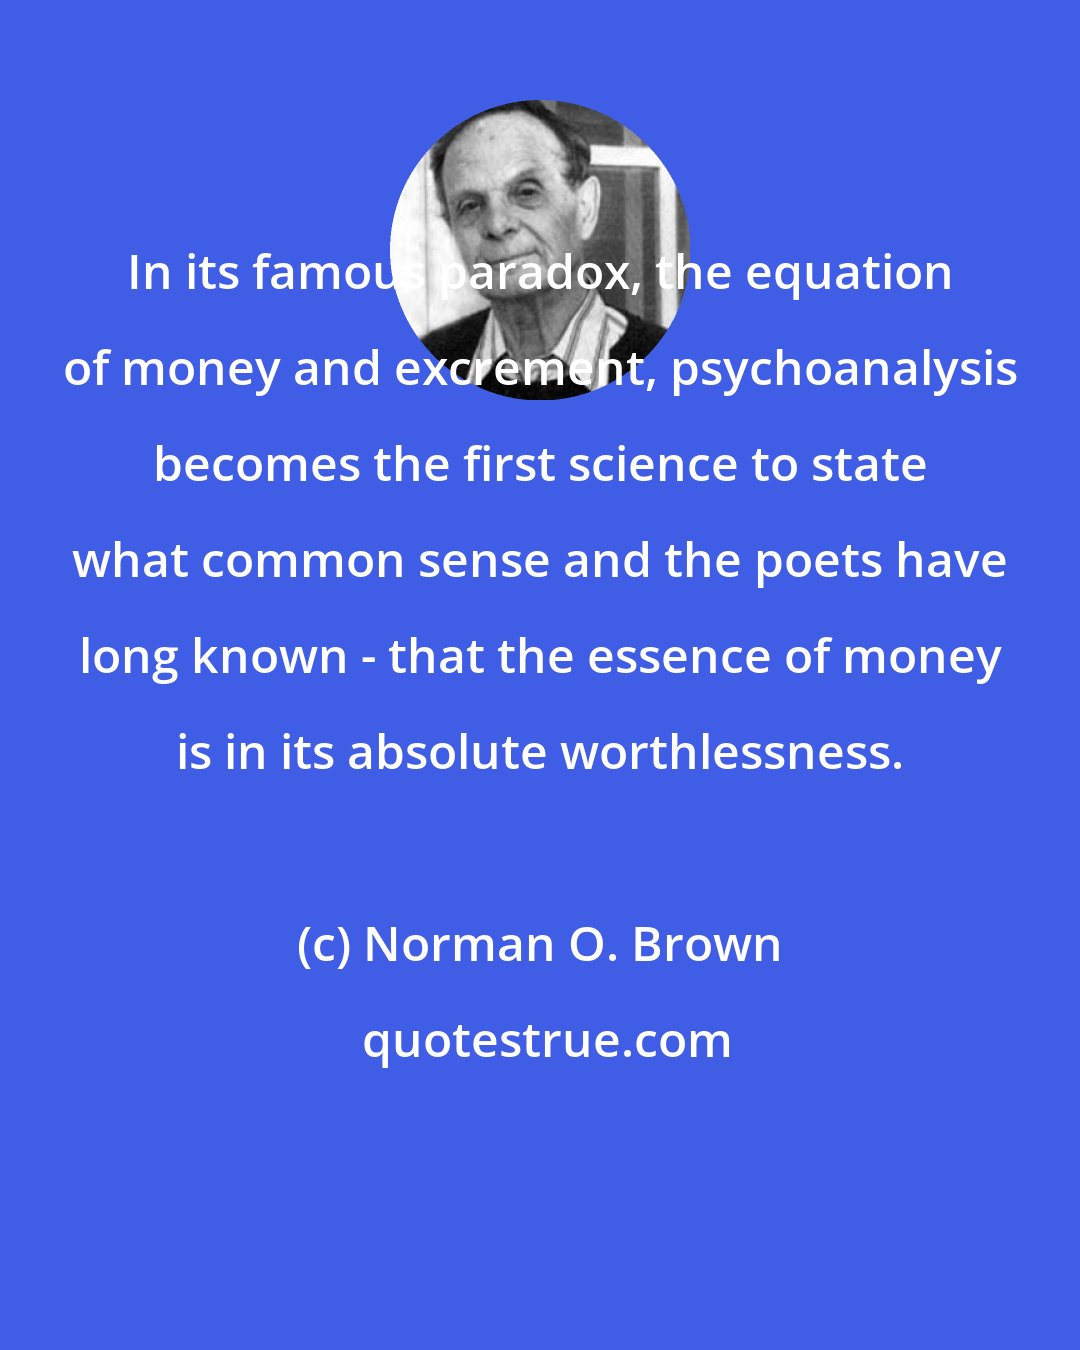 Norman O. Brown: In its famous paradox, the equation of money and excrement, psychoanalysis becomes the first science to state what common sense and the poets have long known - that the essence of money is in its absolute worthlessness.